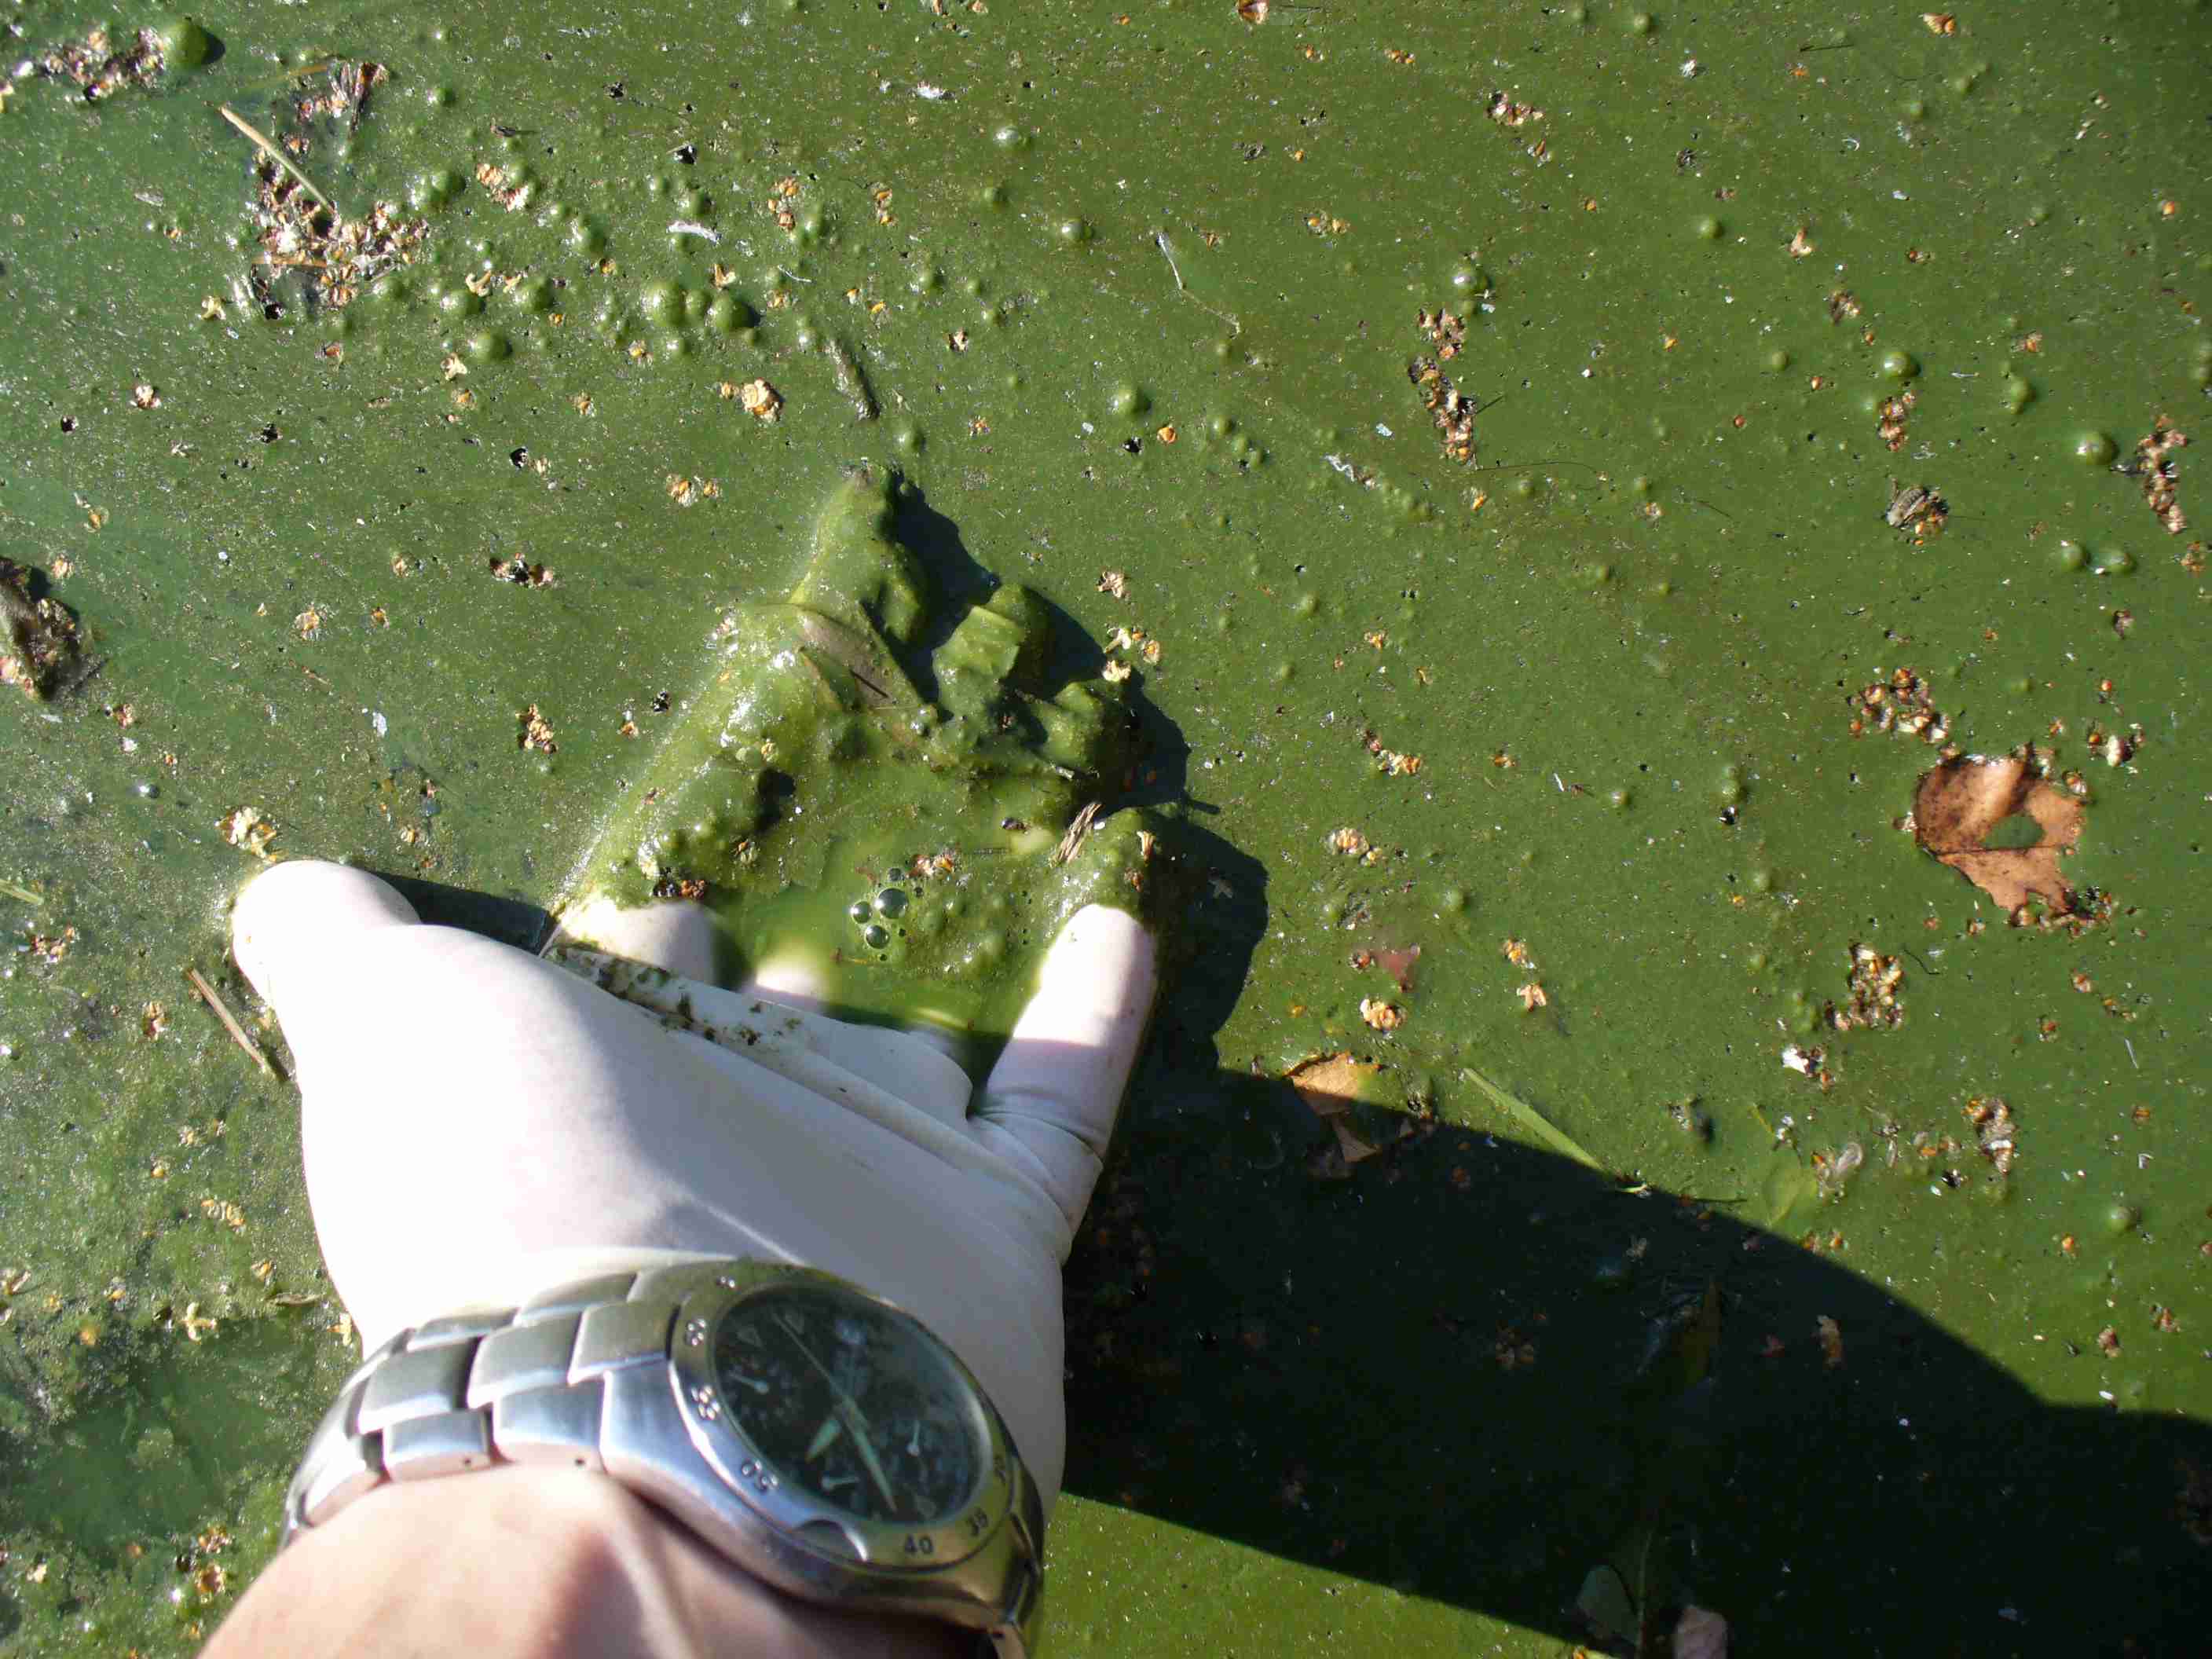 Cyanobacteria found in lakes can assist missions to Mars.